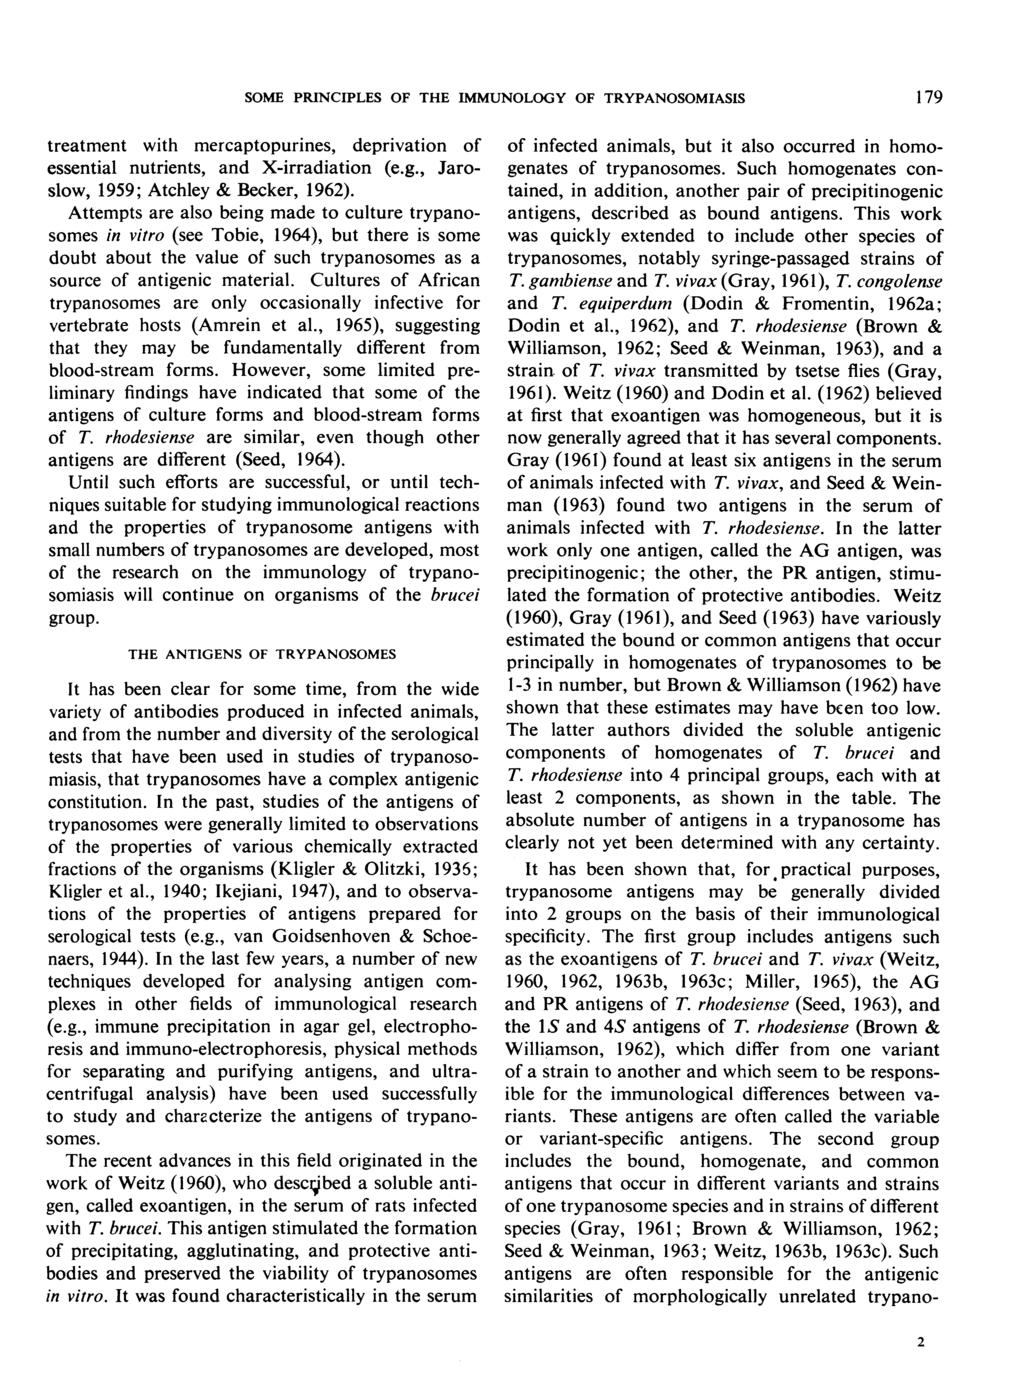 SOME PRINCIPLES OF THE IMMUNOLOGY OF TRYPANOSOMIASIS 179 treatment with mercaptopurines, deprivation of essential nutrients, and X-irradiation (e.g., Jaroslow, 1959; Atchley & Becker, 1962).